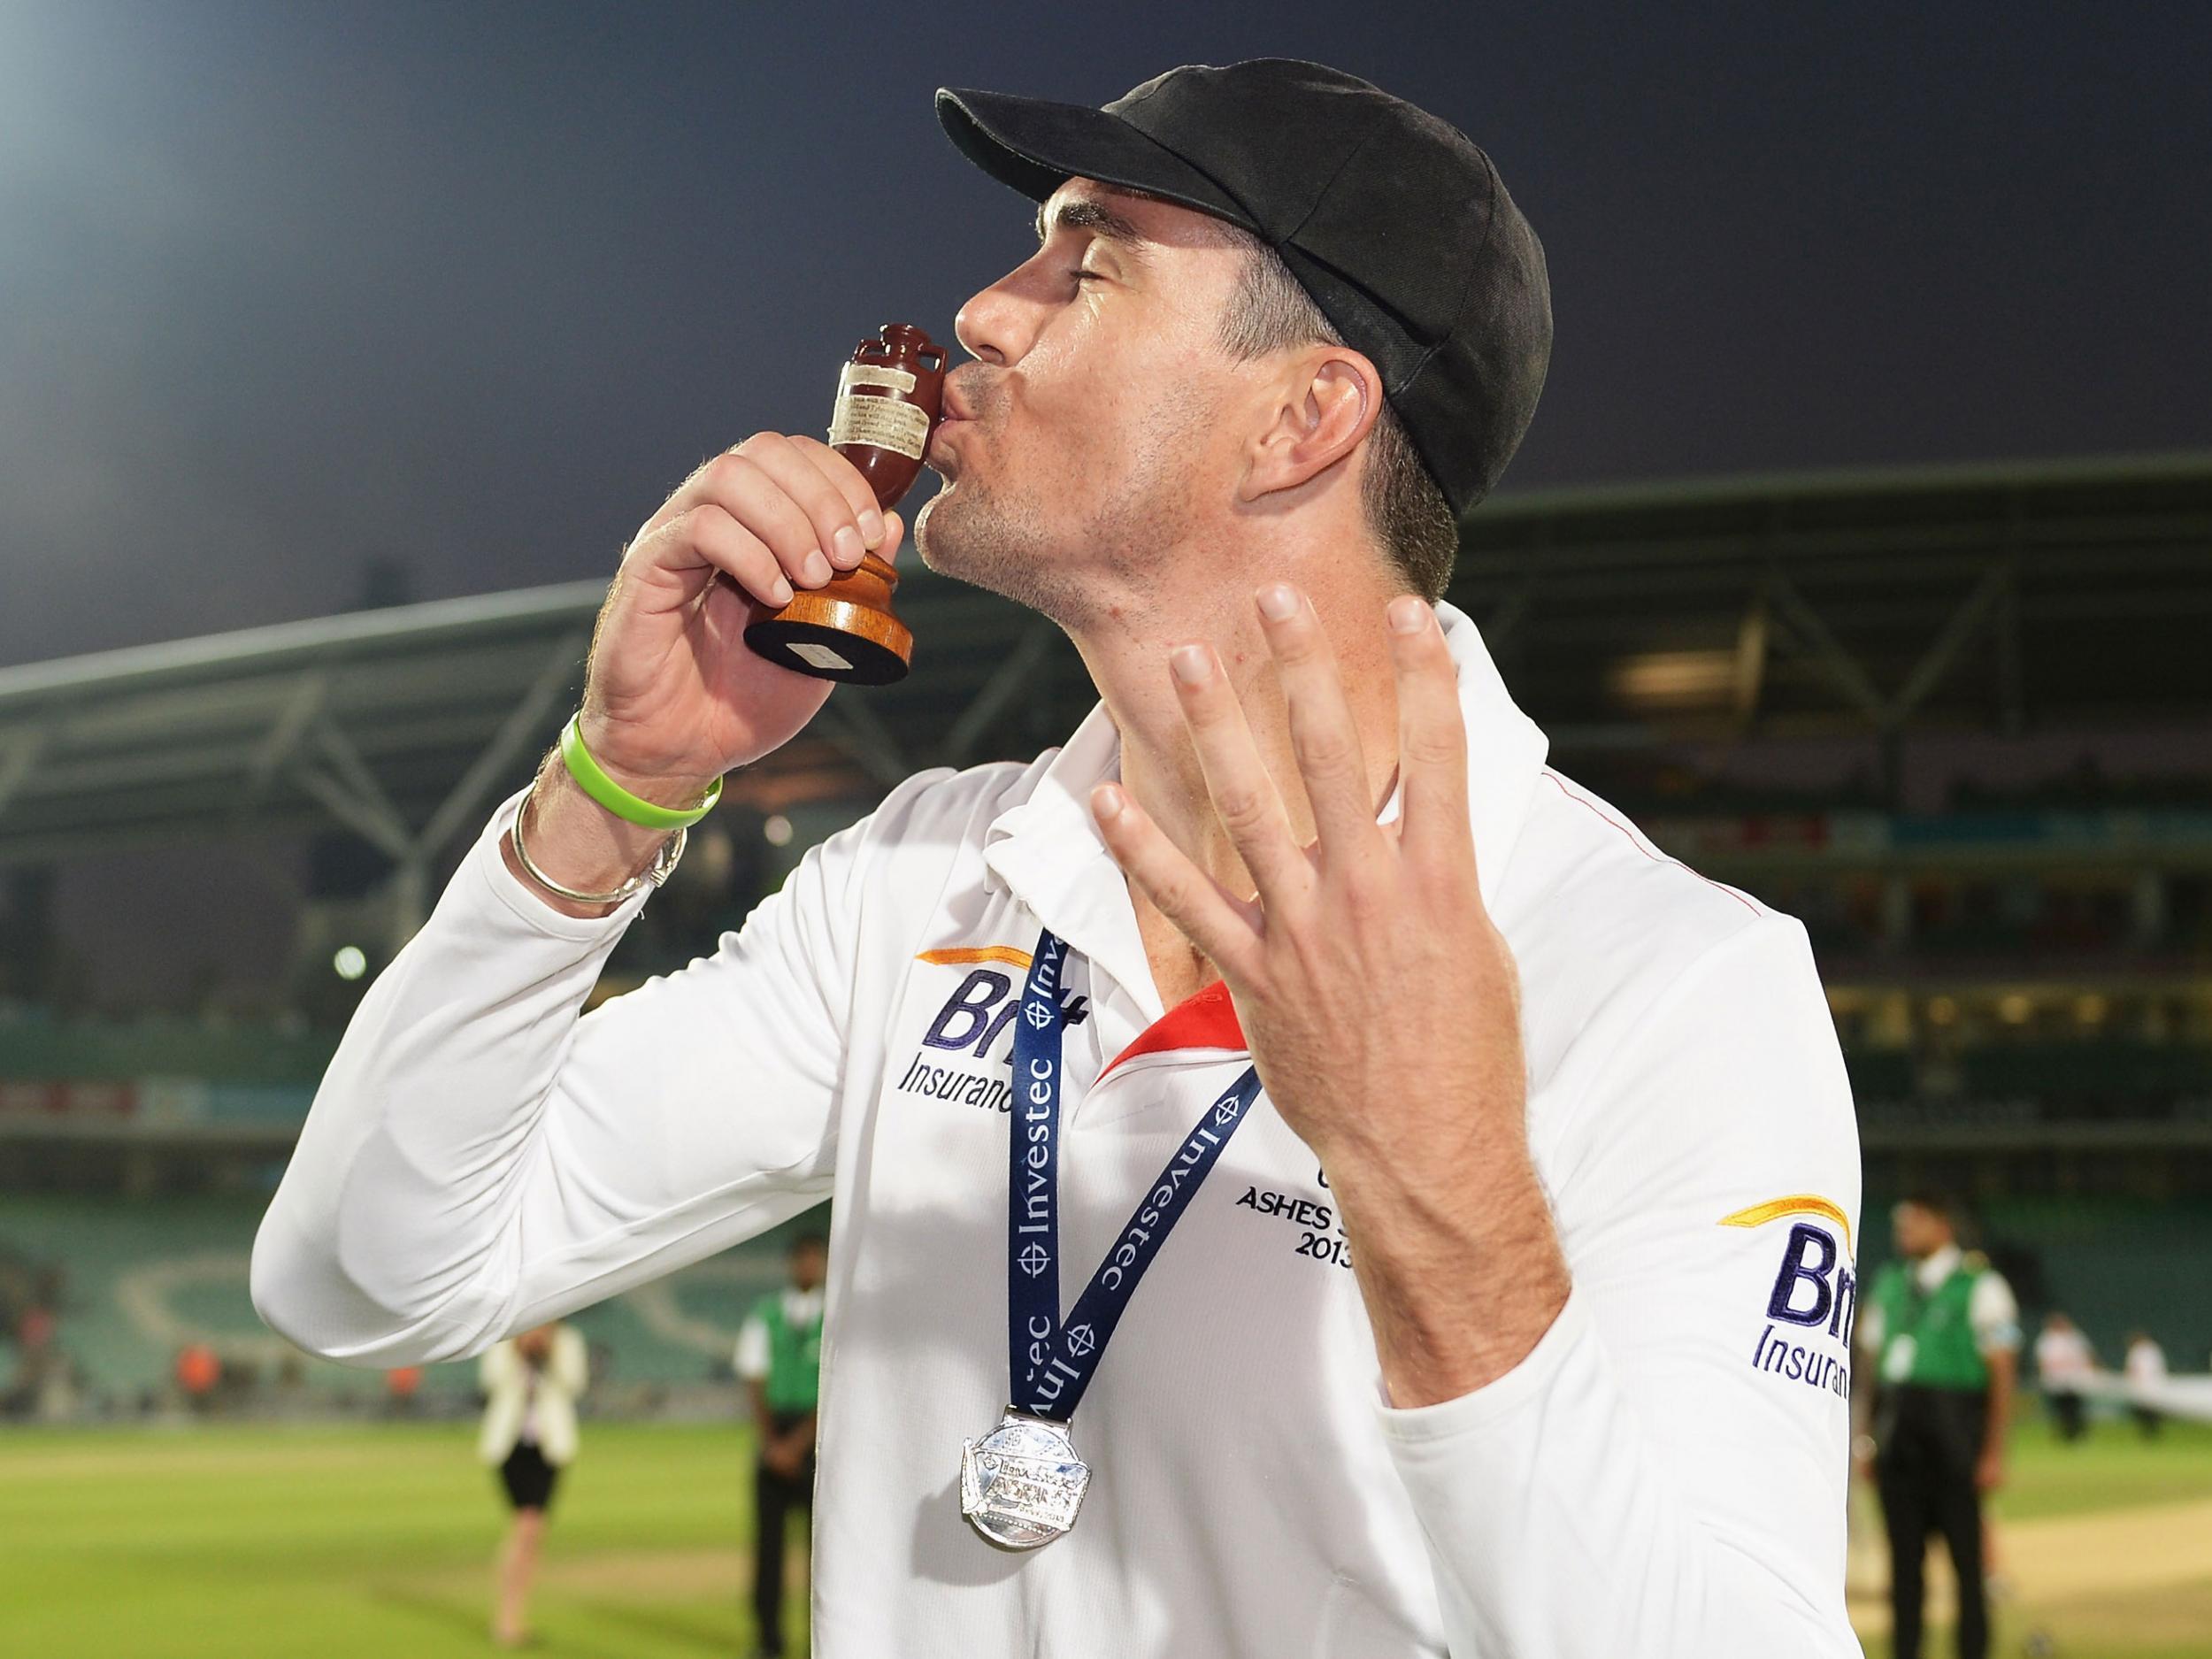 Kevin Pietersen has called time on his glittering career